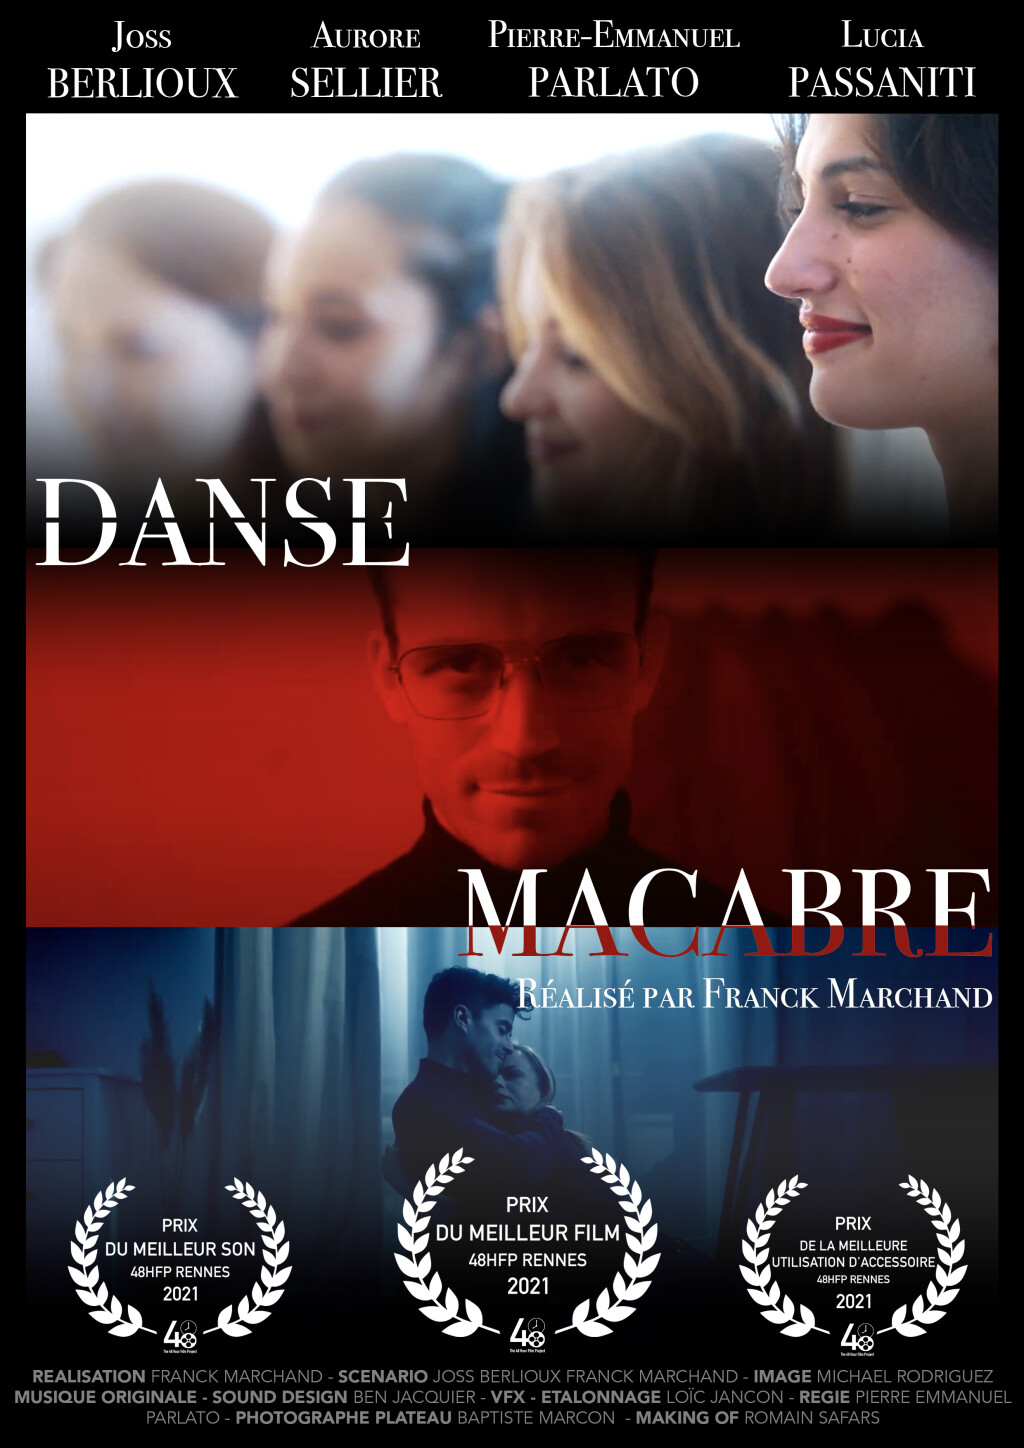 Filmposter for Danse Macabre